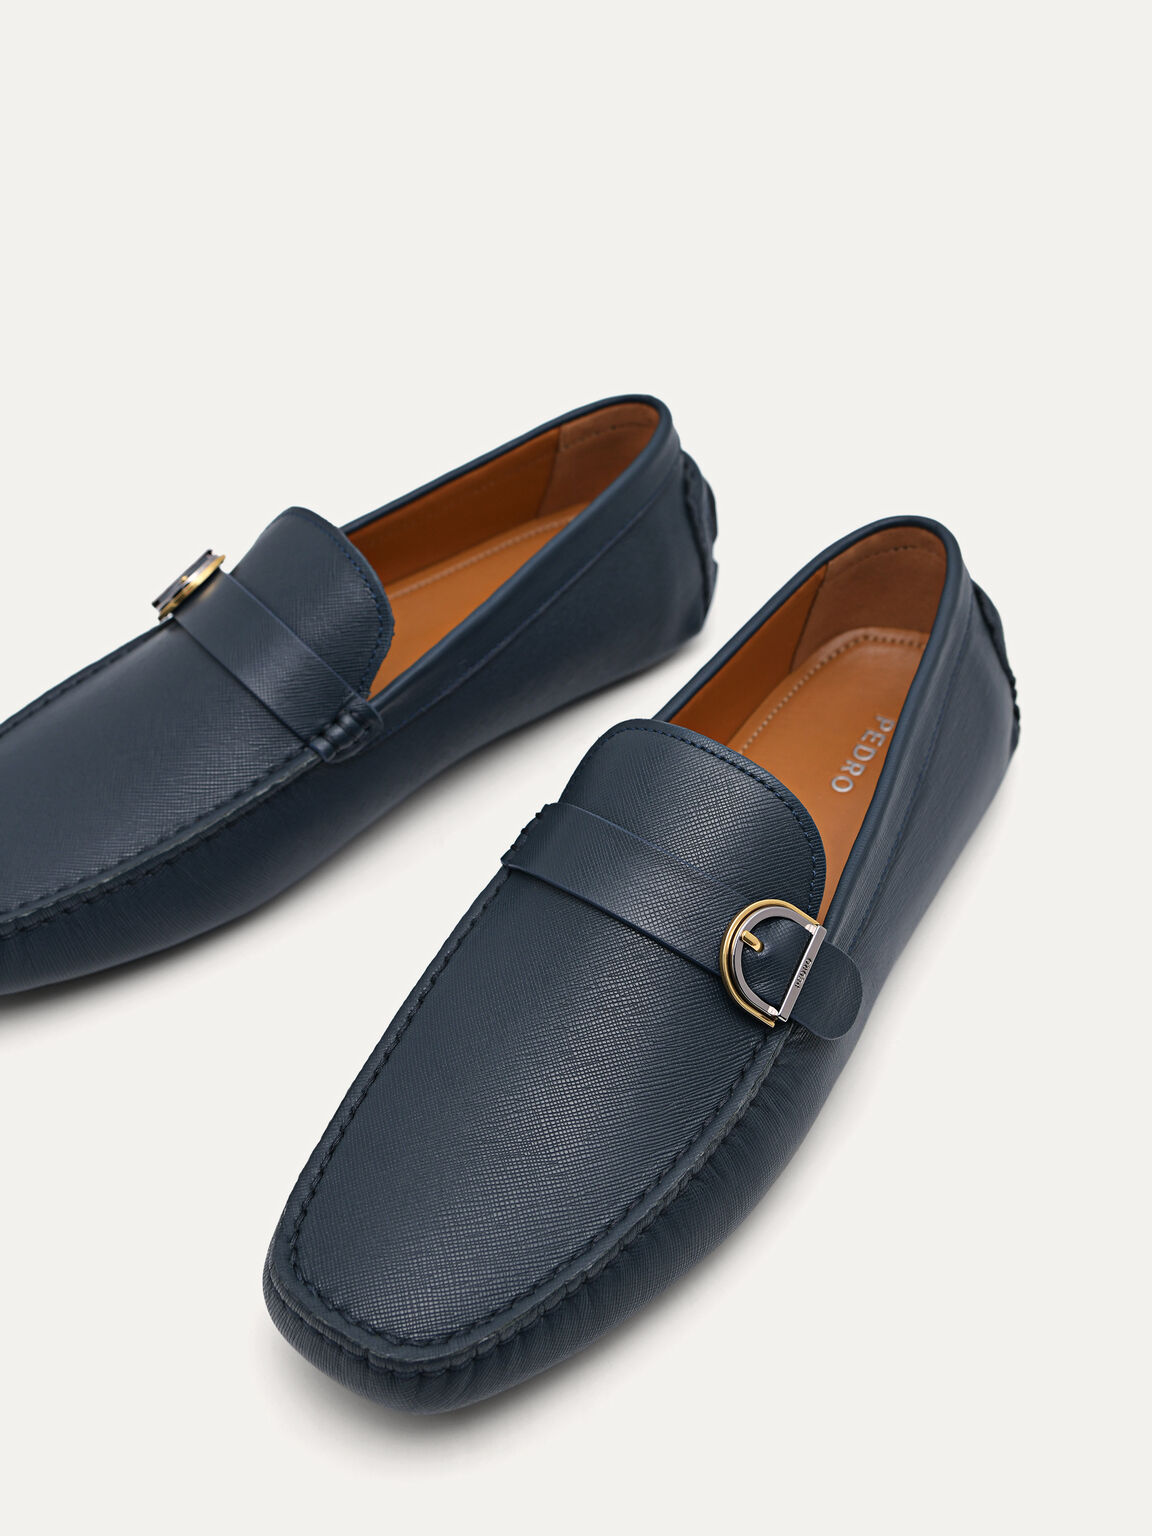 Leather Moccasins with Buckle Detail, Navy